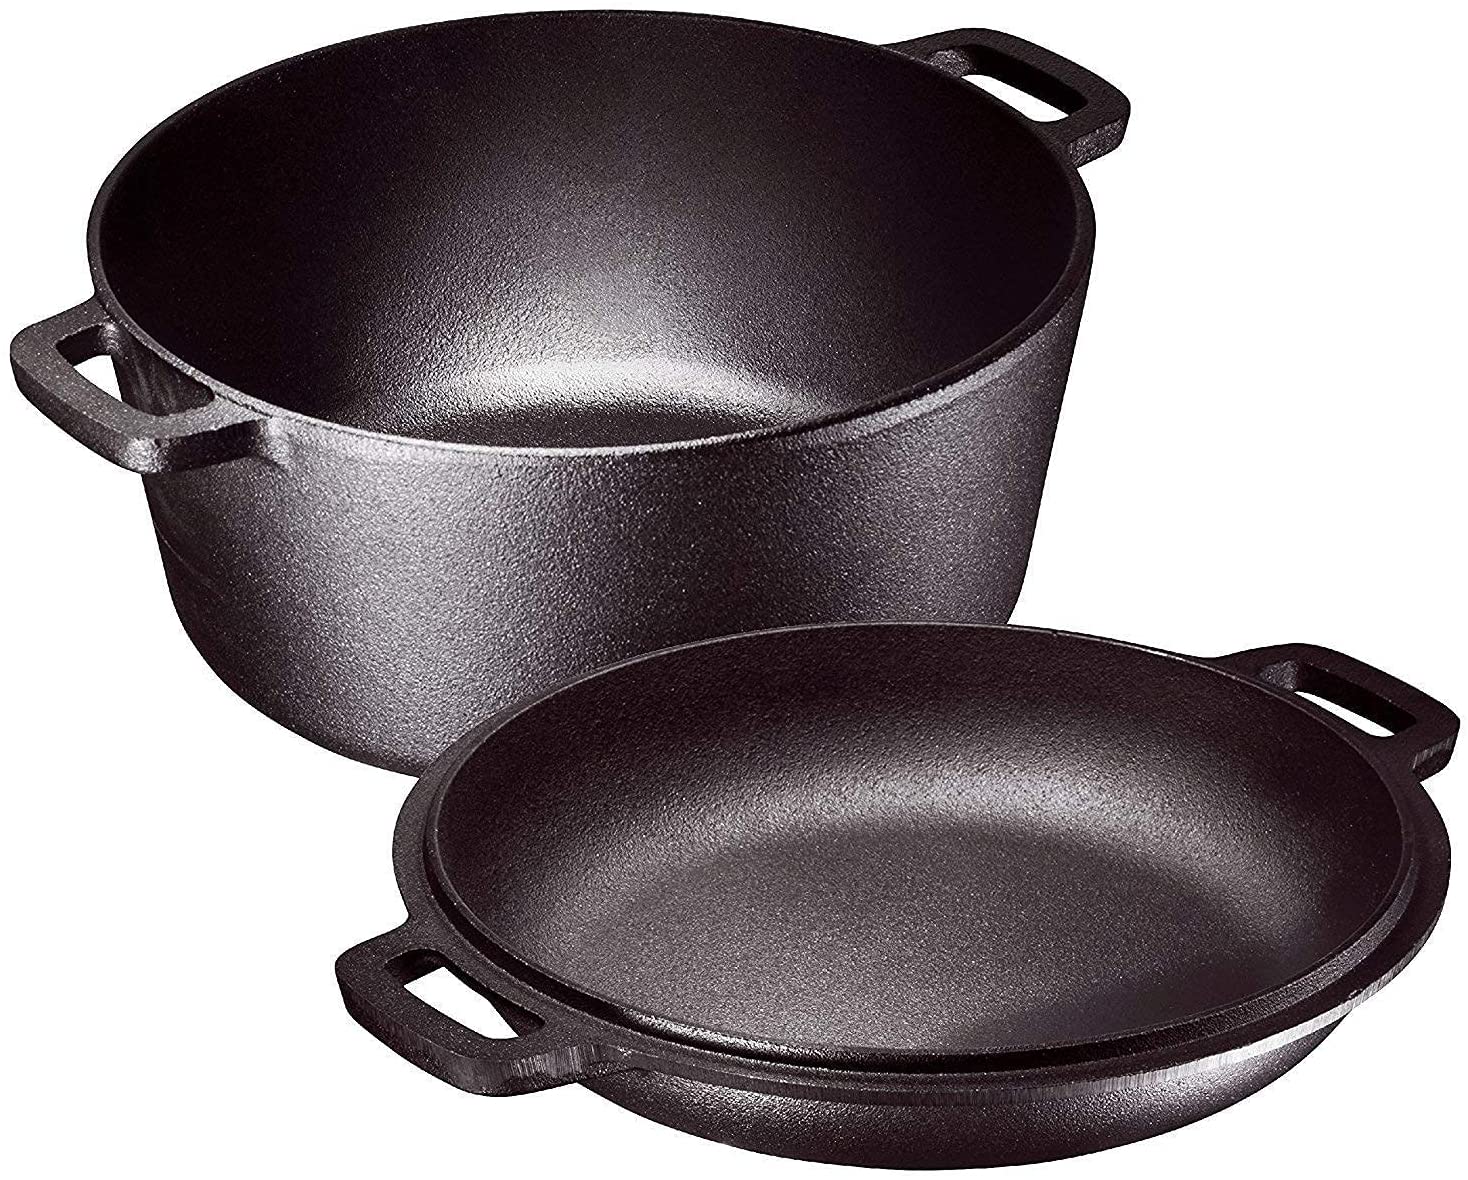 Cast Iron Dutch Oven Set - 2 In 1 Cooker, Pre-Seasoned Cast Iron Skillet - 5 Quart Casserole Pot 10 Inch Frying Pan for Bread, Frying, Cooking